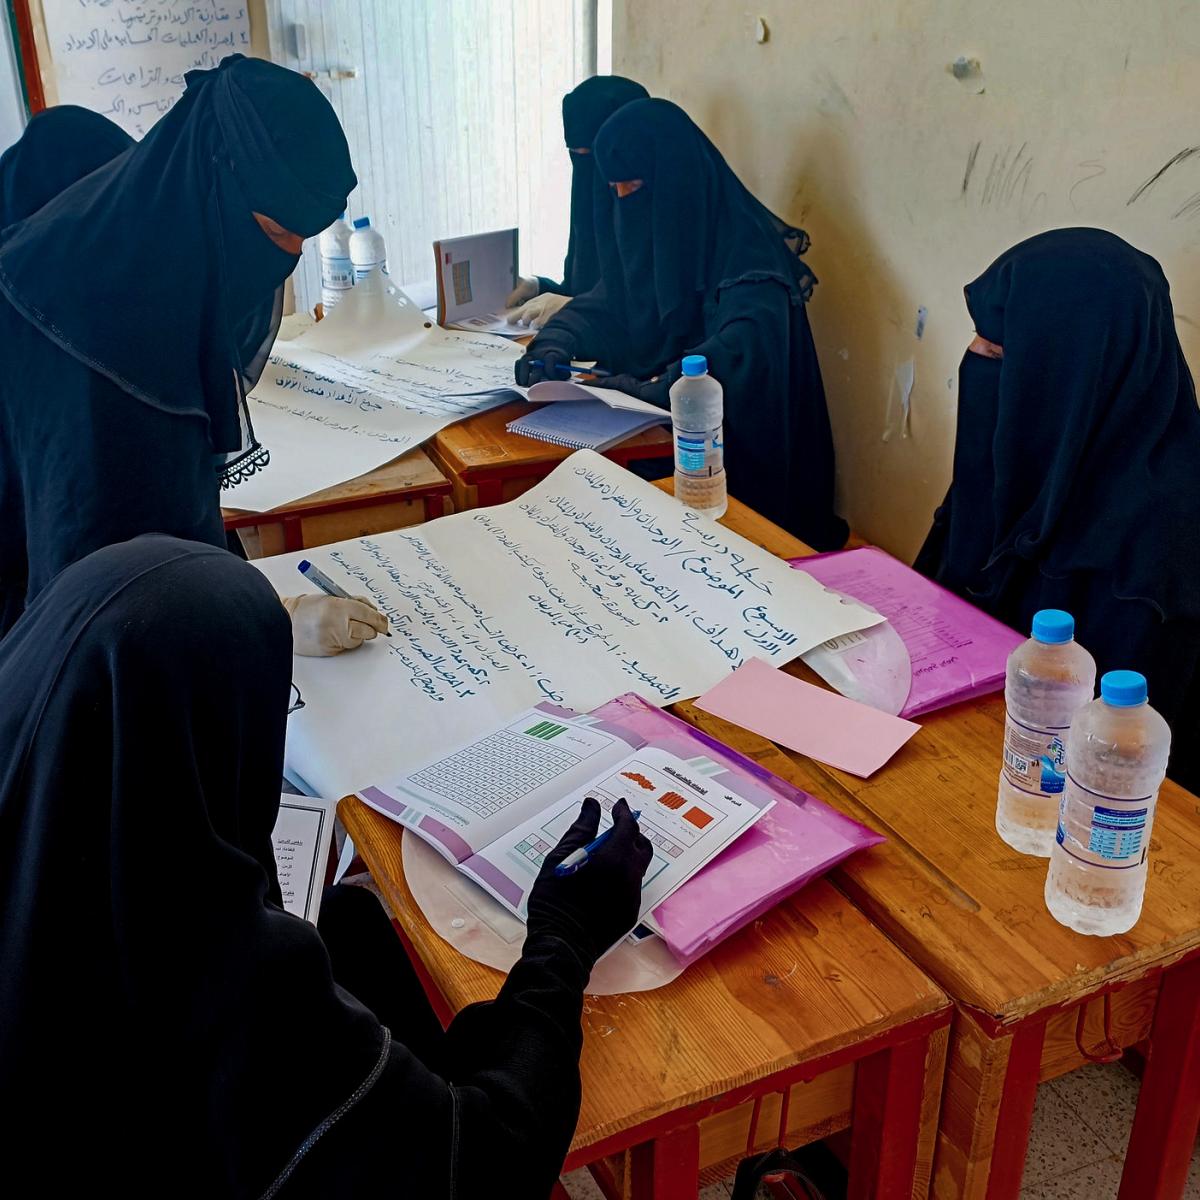 USAID and implementing partner, Save the Children, have carried out training for 80 teachers from the Lahj Governorate who were selected to support an after school remedial program for children at risk of dropping out of school.